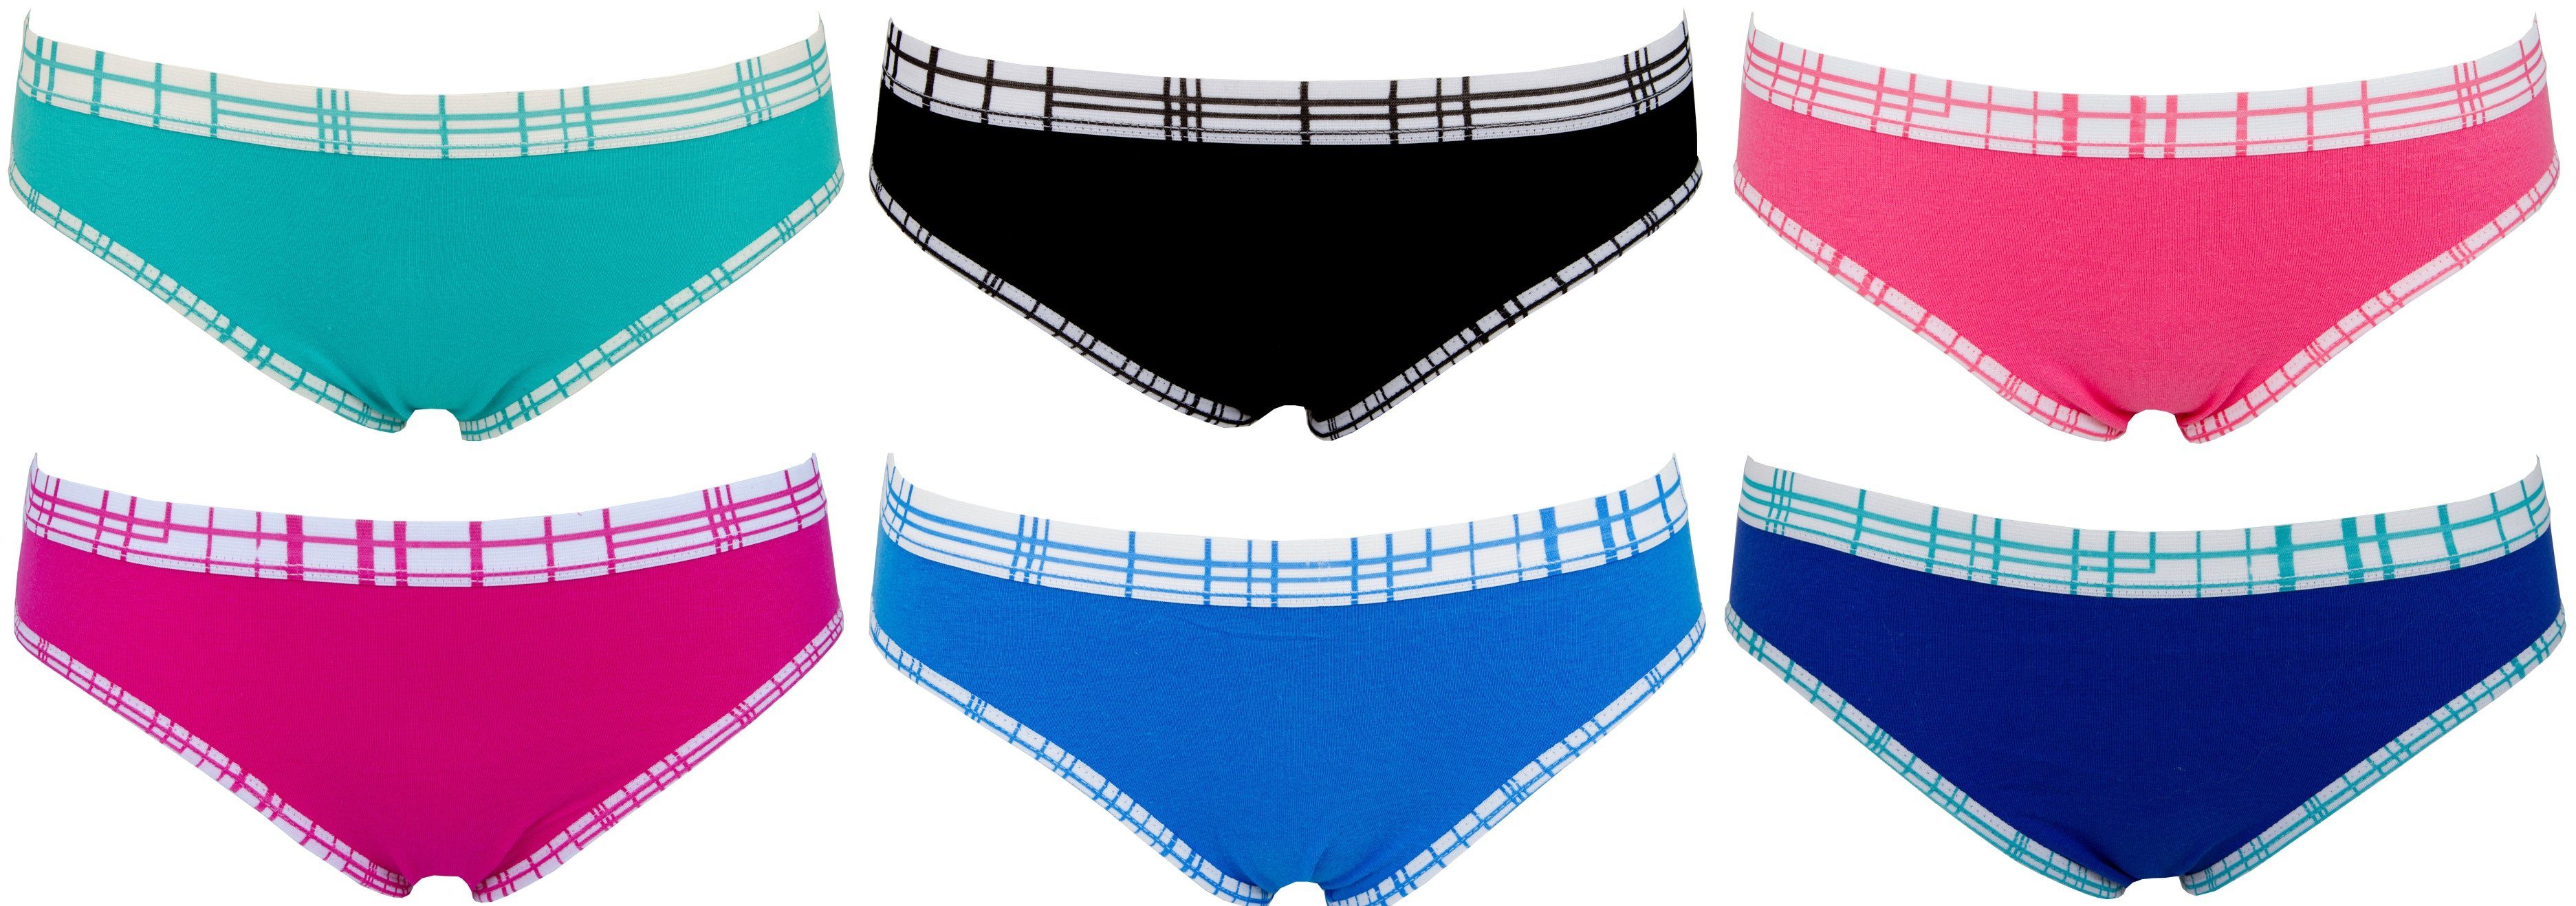 AvaMia Panty 6er Pack Pantys mit Spitze Uni Hotpants Hipster French Knickers Damen Teen 86927 (Spar-Set, 6er-Pack) 6er Pack Pantys mit Spitze Uni Hotpants Hipster French Knickers Damen Teen 86927